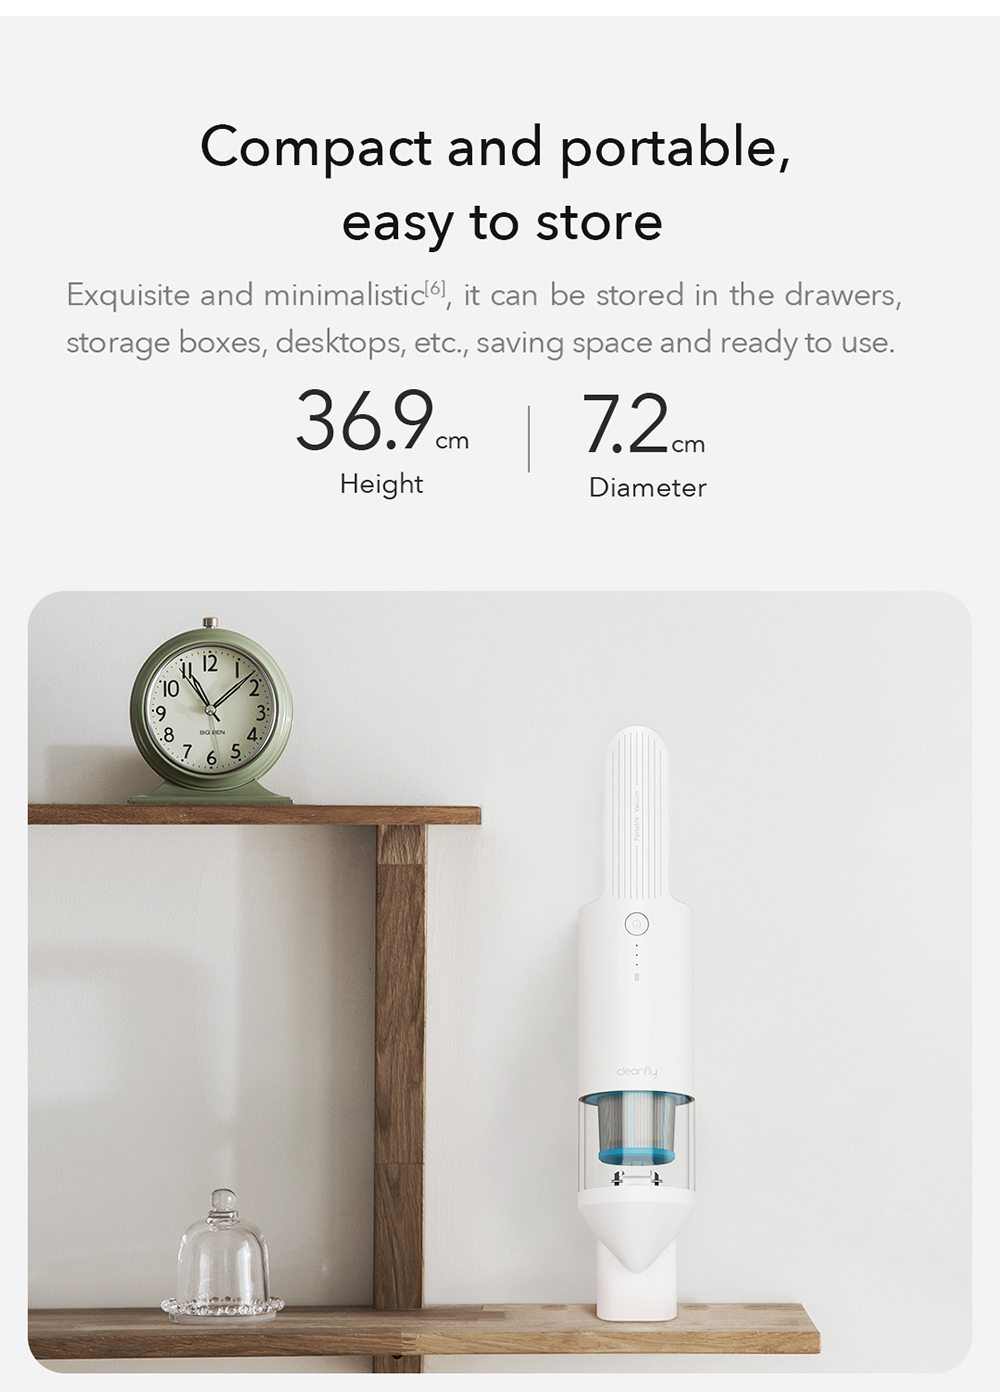 Cleanfly FV2 Portable Cordless Handheld Vacuum Cleaner 120W Brushless Digital Motor 16800Pa Suction Mite Removal Rate 99.9% One-click Dusting 3 x 2000 mAh Battery 25min Runtime For Sofa / Car Seat / Pet Hair From Xiaomi Youpin - White